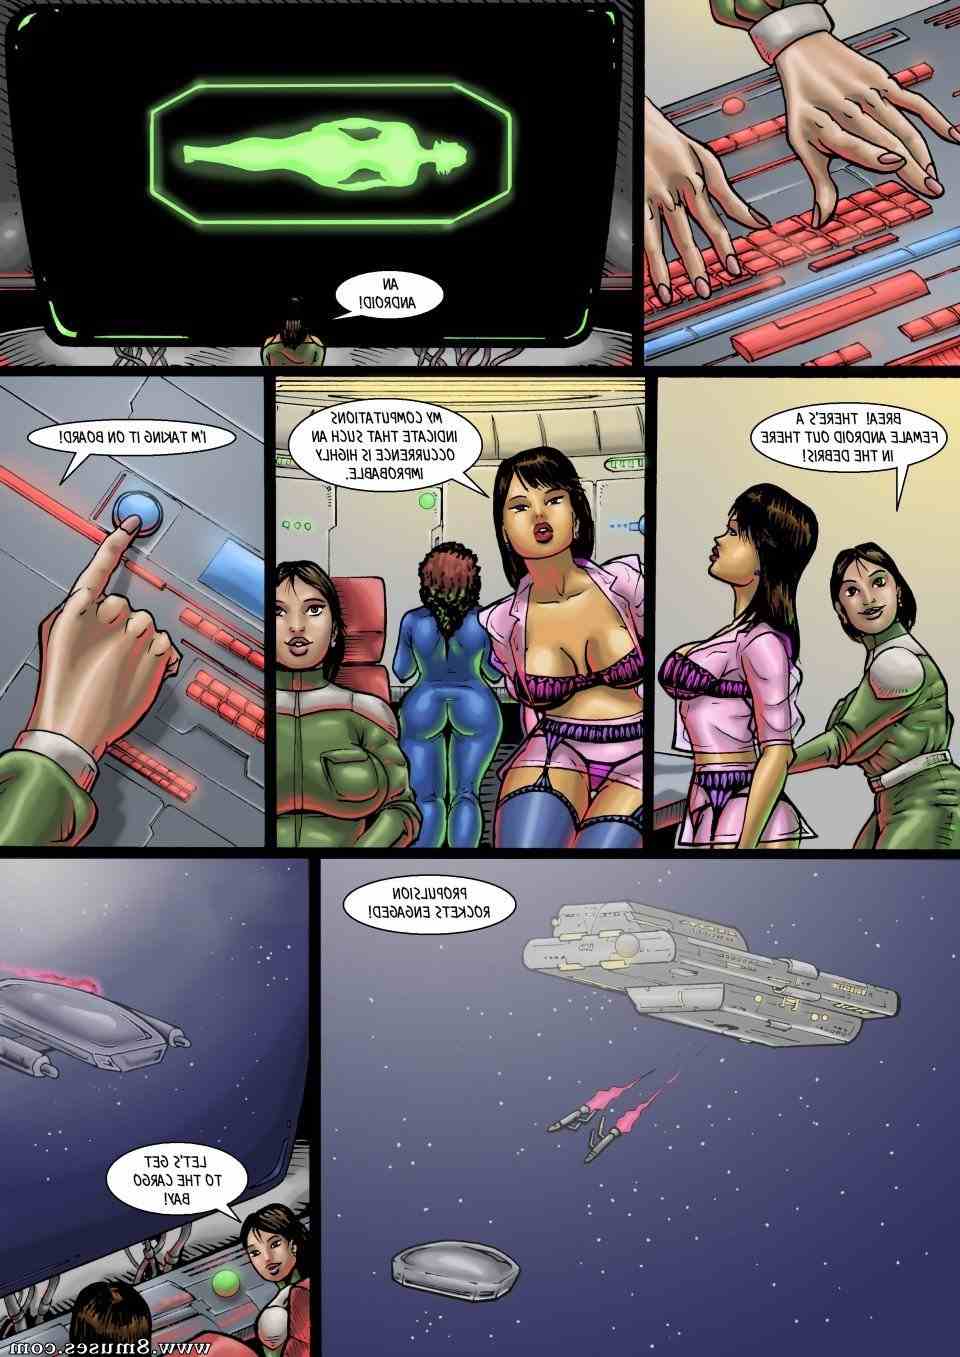 Various-Authors/Predator/Sex-Droids-in-Space Sex_Droids_in_Space__8muses_-_Sex_and_Porn_Comics_15.jpg